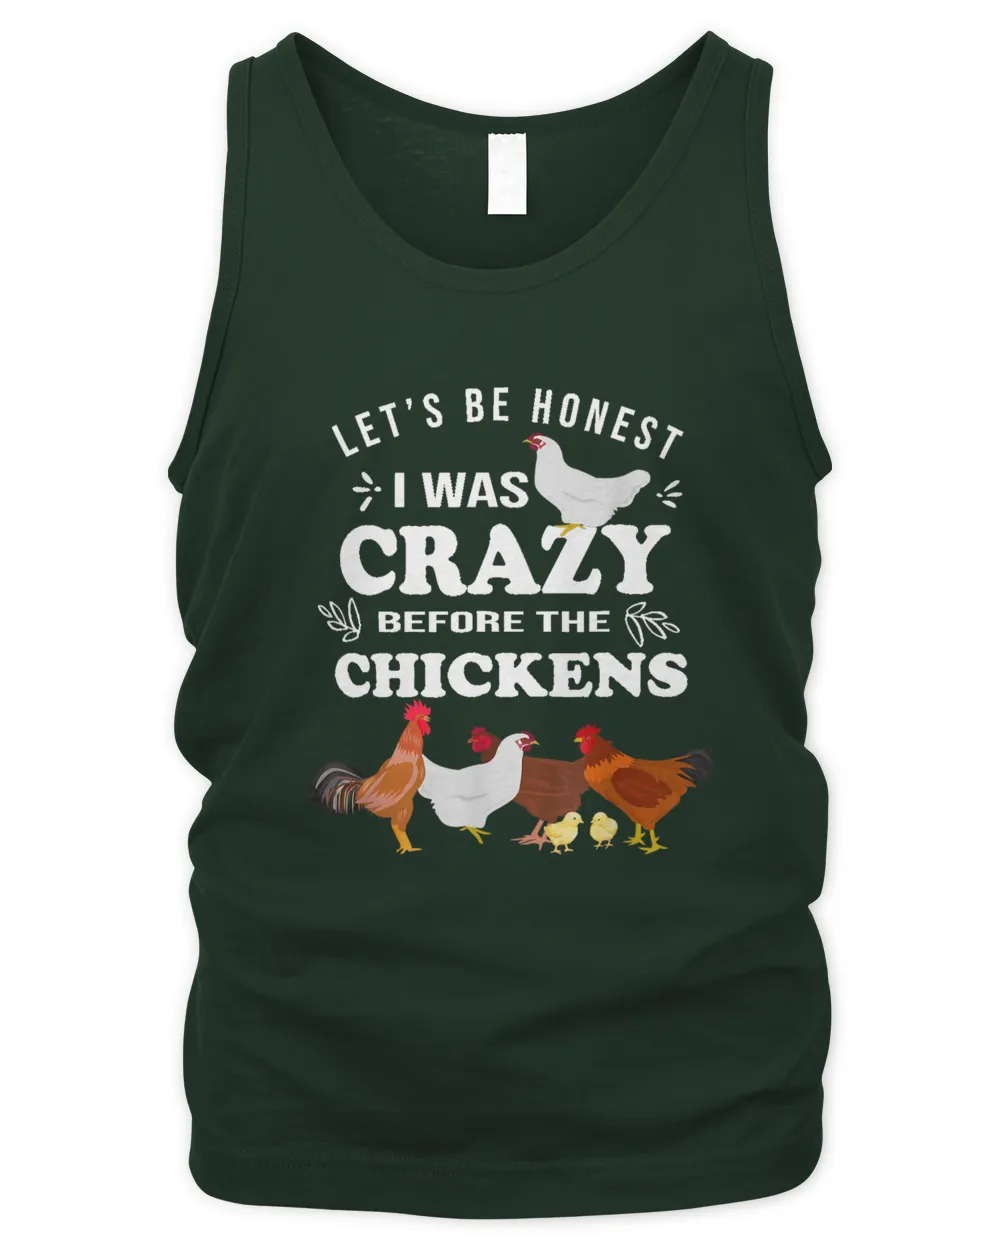 Crazy Chicken Lady Shirt Let's Be Honest I was Crazy Before